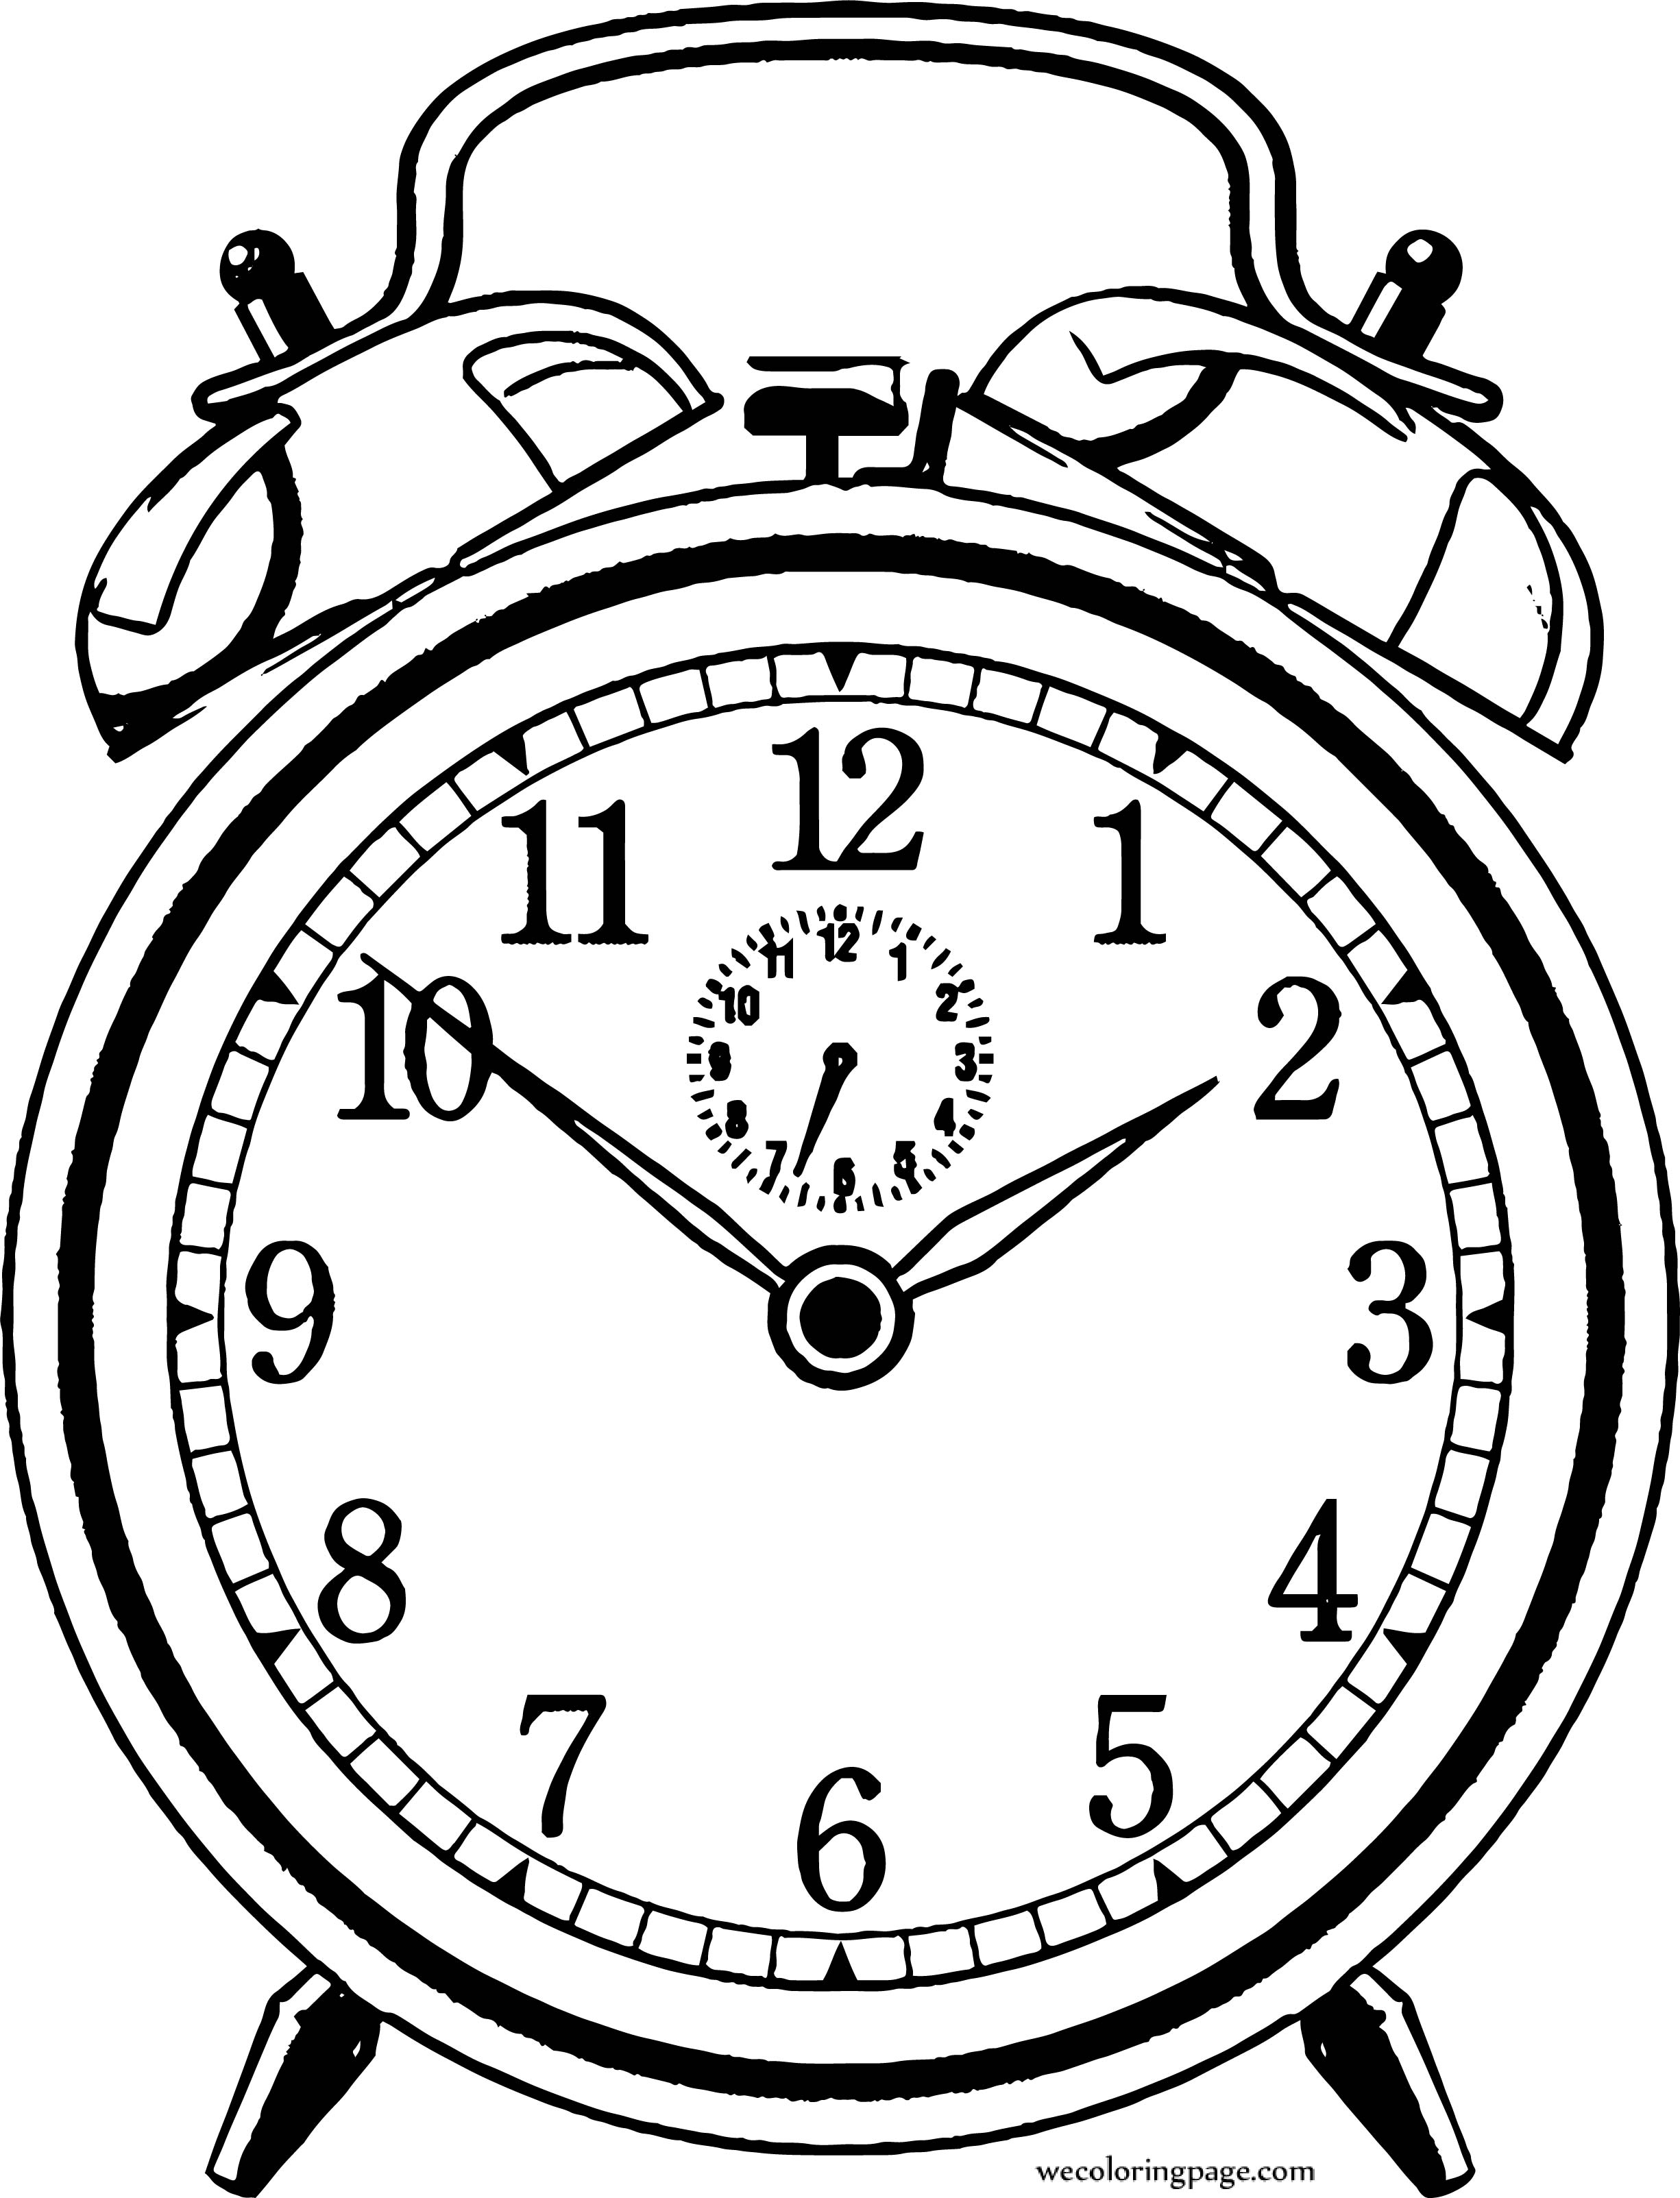 Alarm Clocks Colouring Pages Sketch Coloring Page